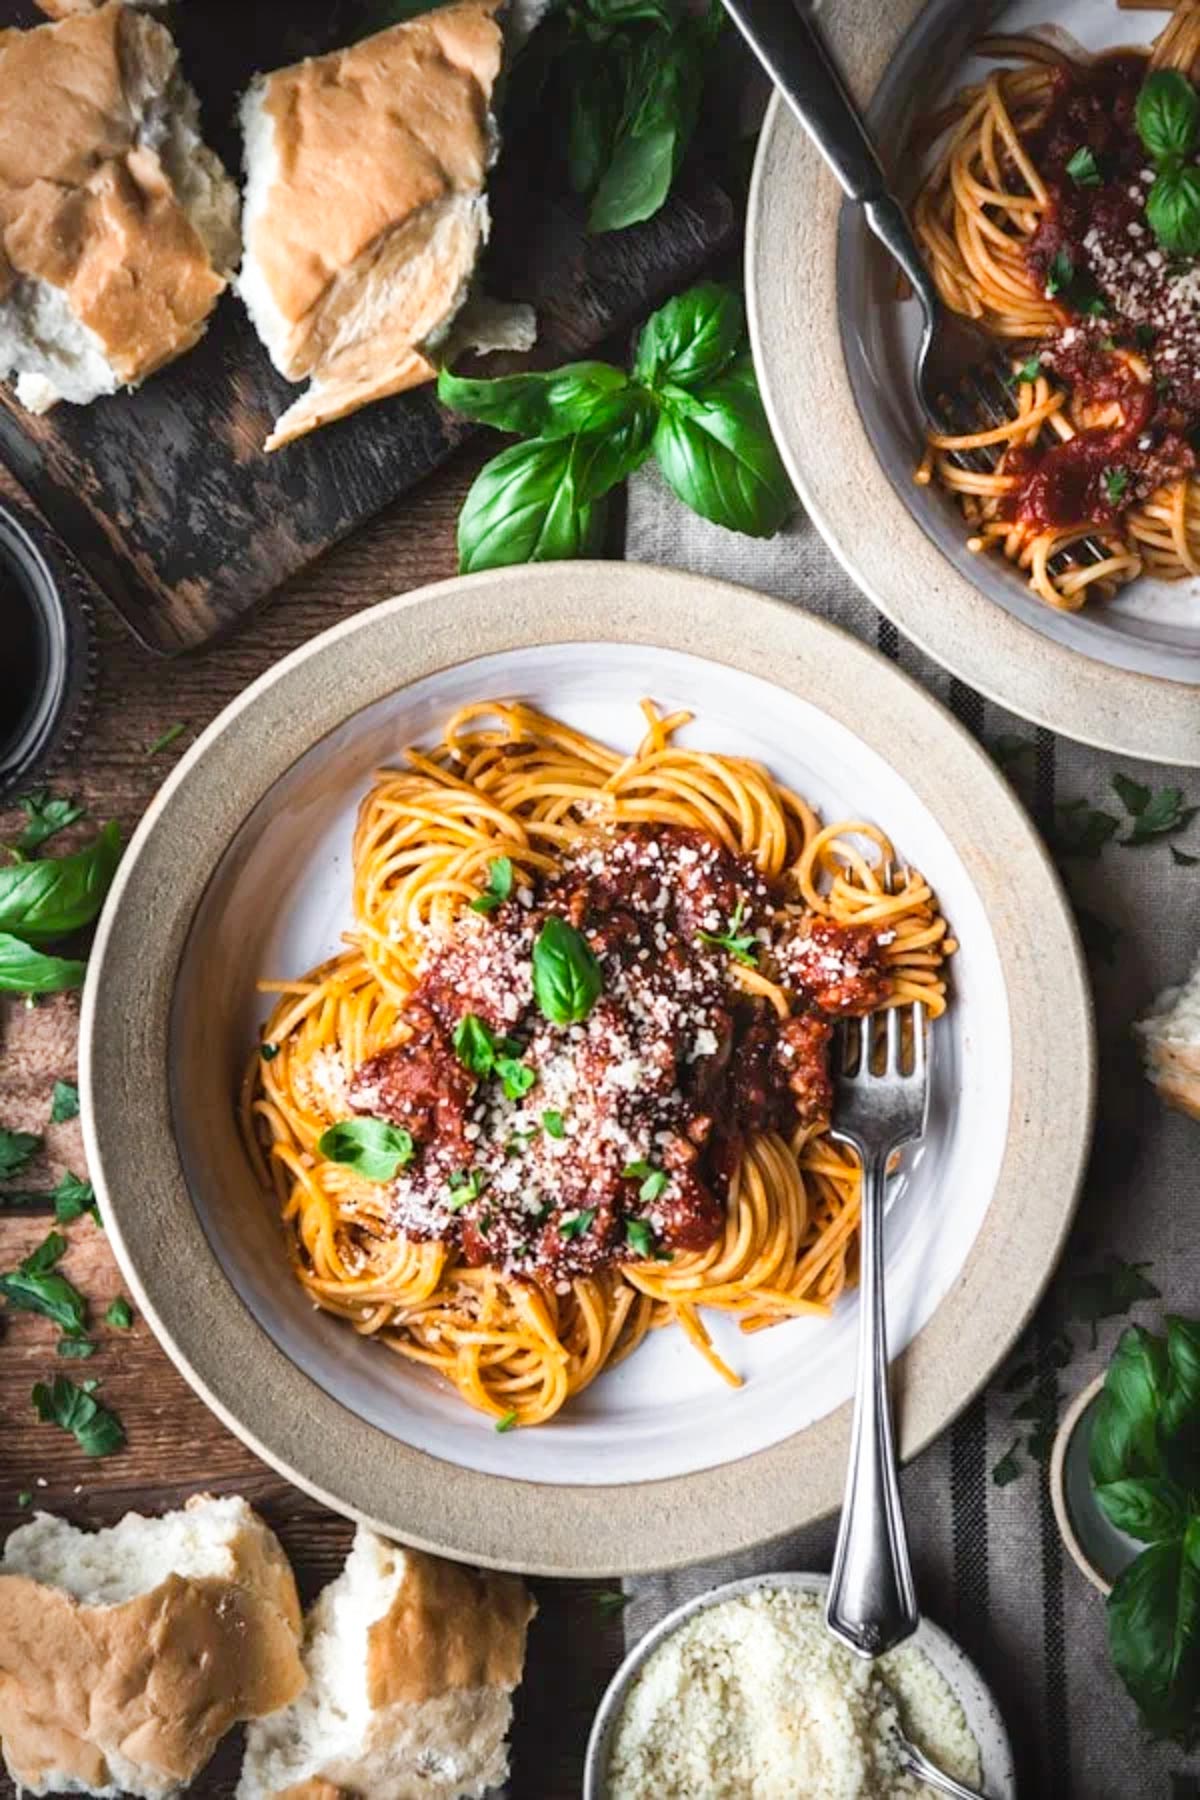 An overhead shot of a bowl of spaghetti topped with a homemade stovetop spaghetti sauce, garnished with grated parmesan cheese and fresh basil leaves.